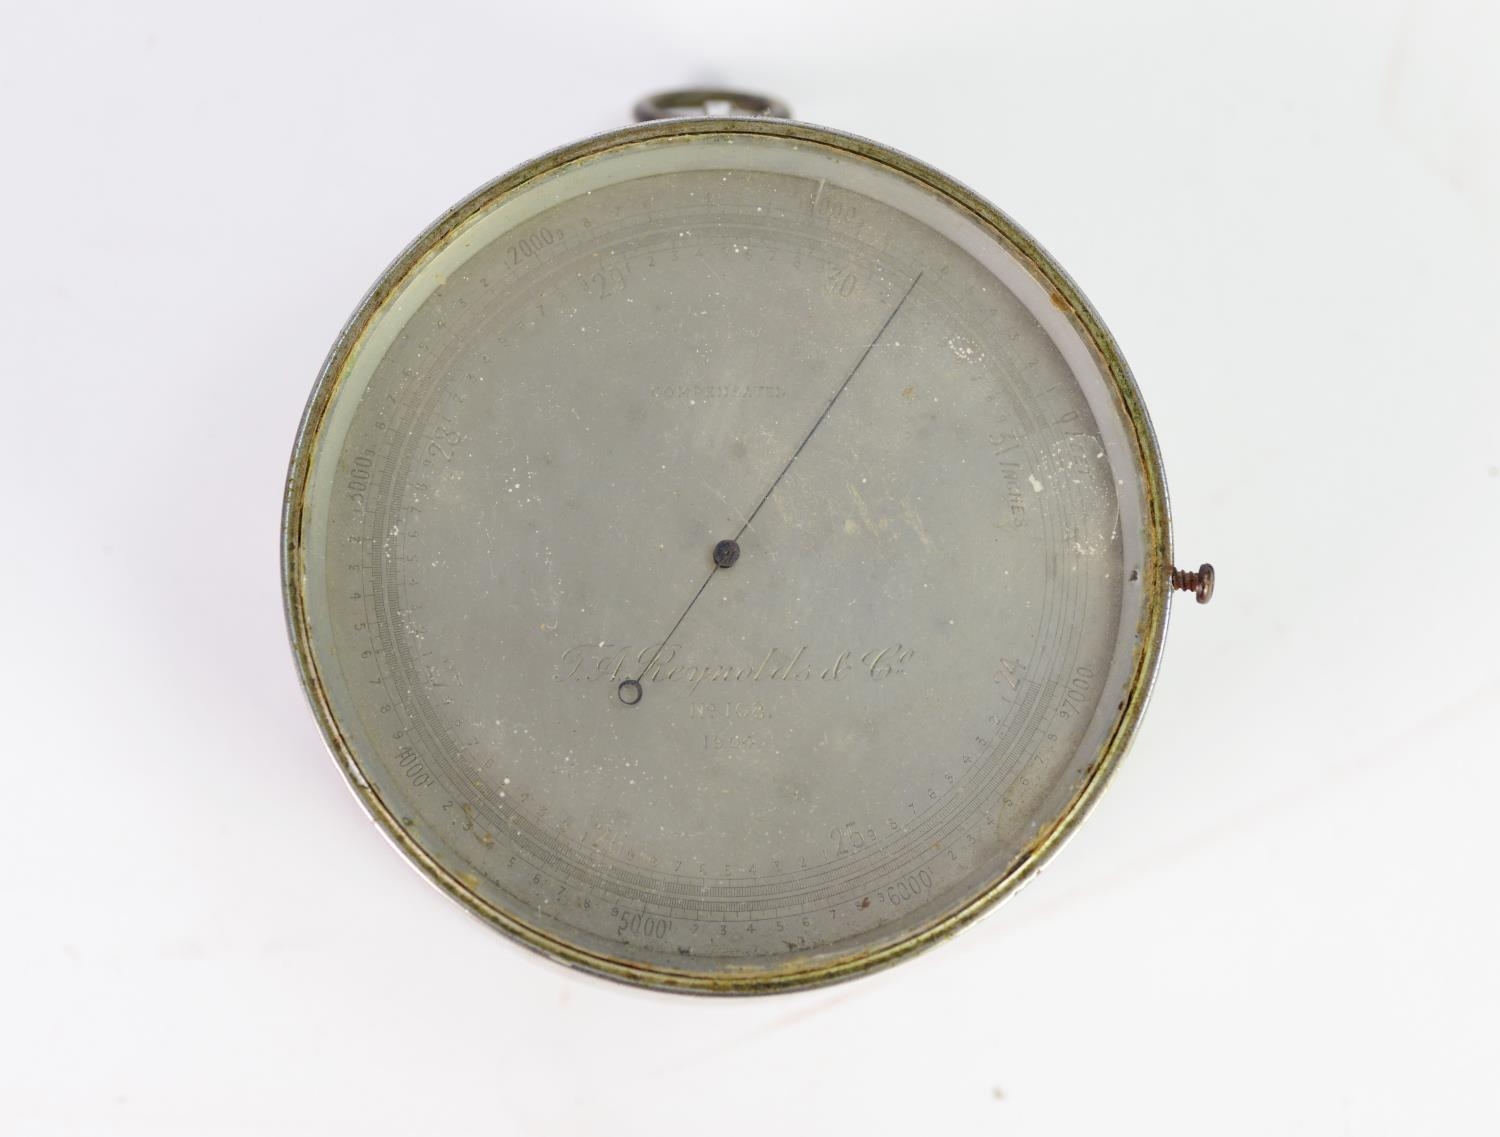 T.A. REYNOLDS WALL MOUNTED COMPENSATED BAROMETER, with silvered dial, 4 ½? (11.4cm) diameter